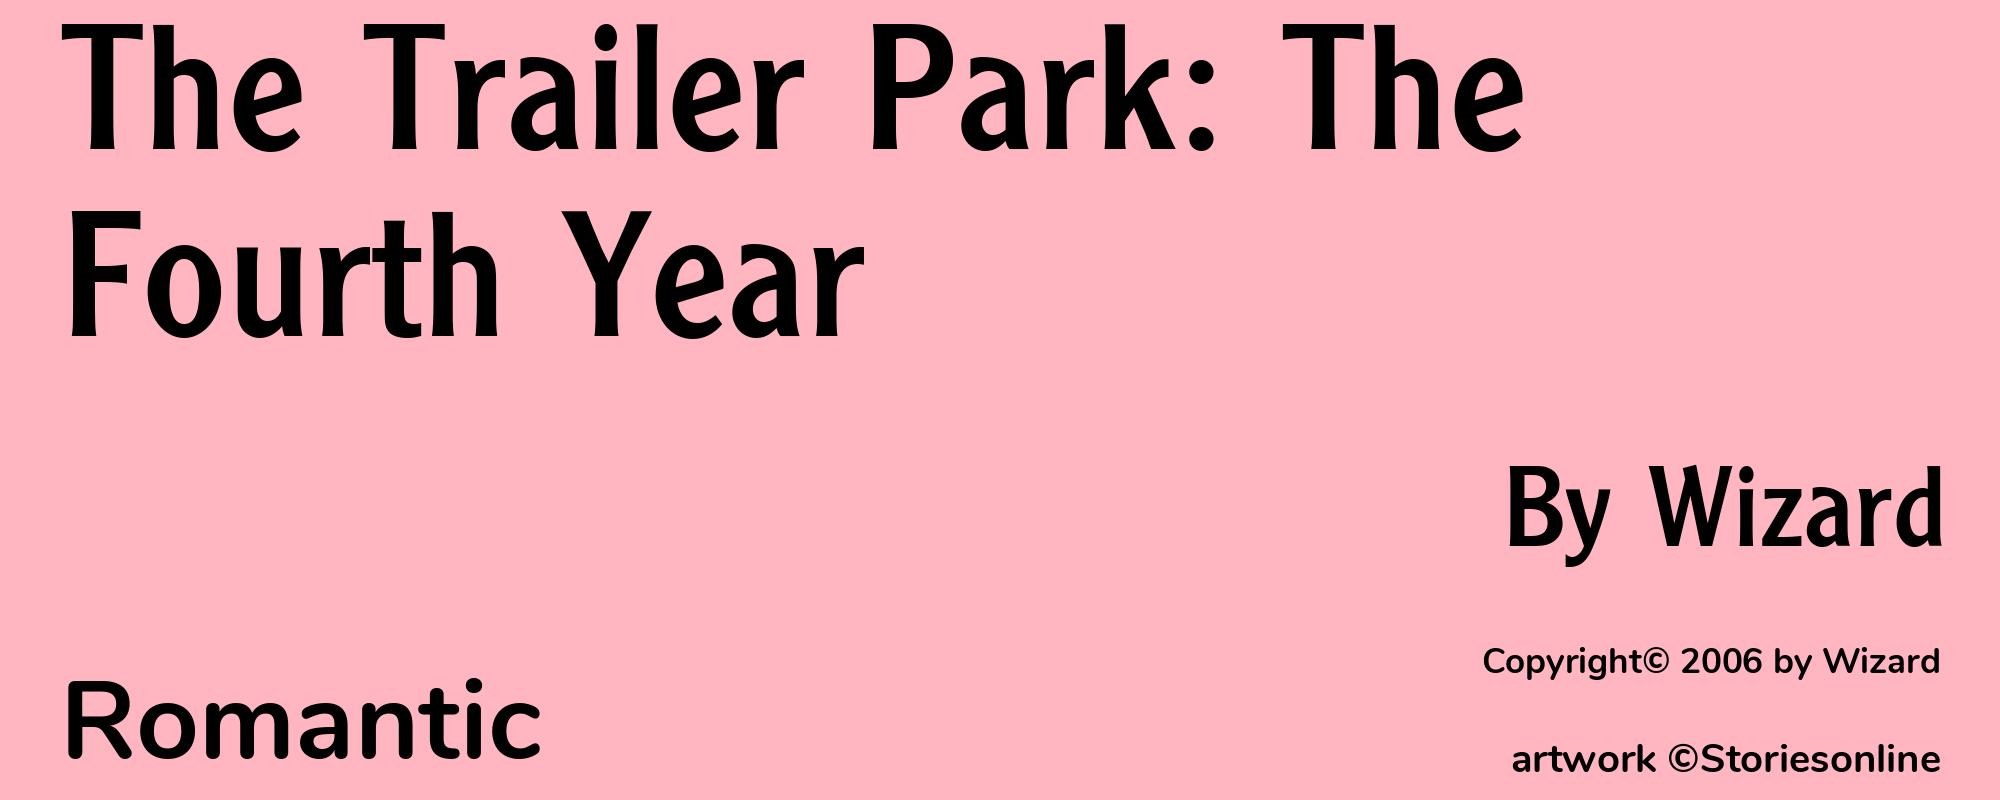 The Trailer Park: The Fourth Year - Cover